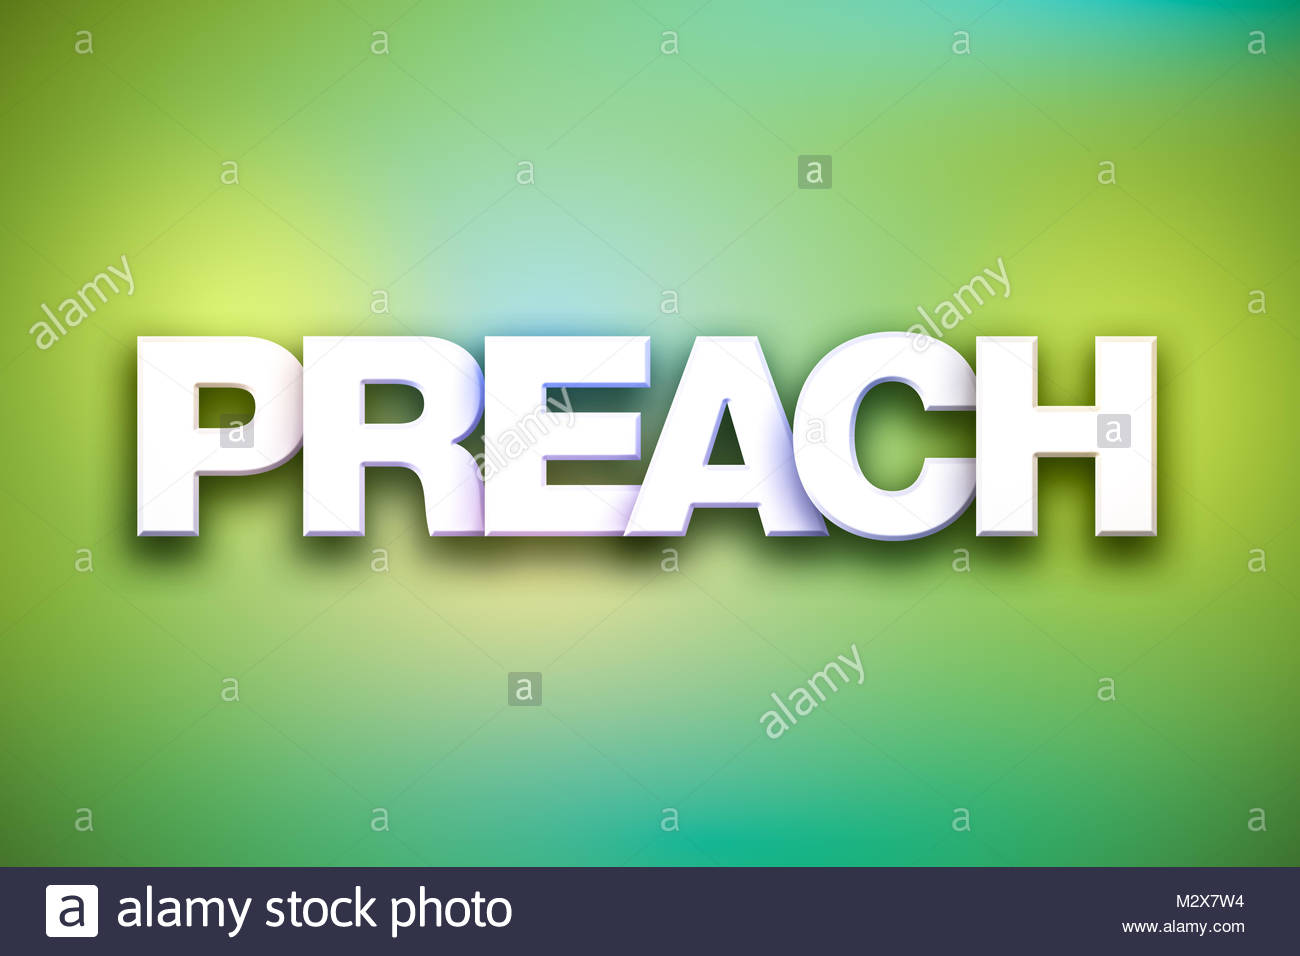 The Word Preach Concept Written In White Type On A Colorful Stock